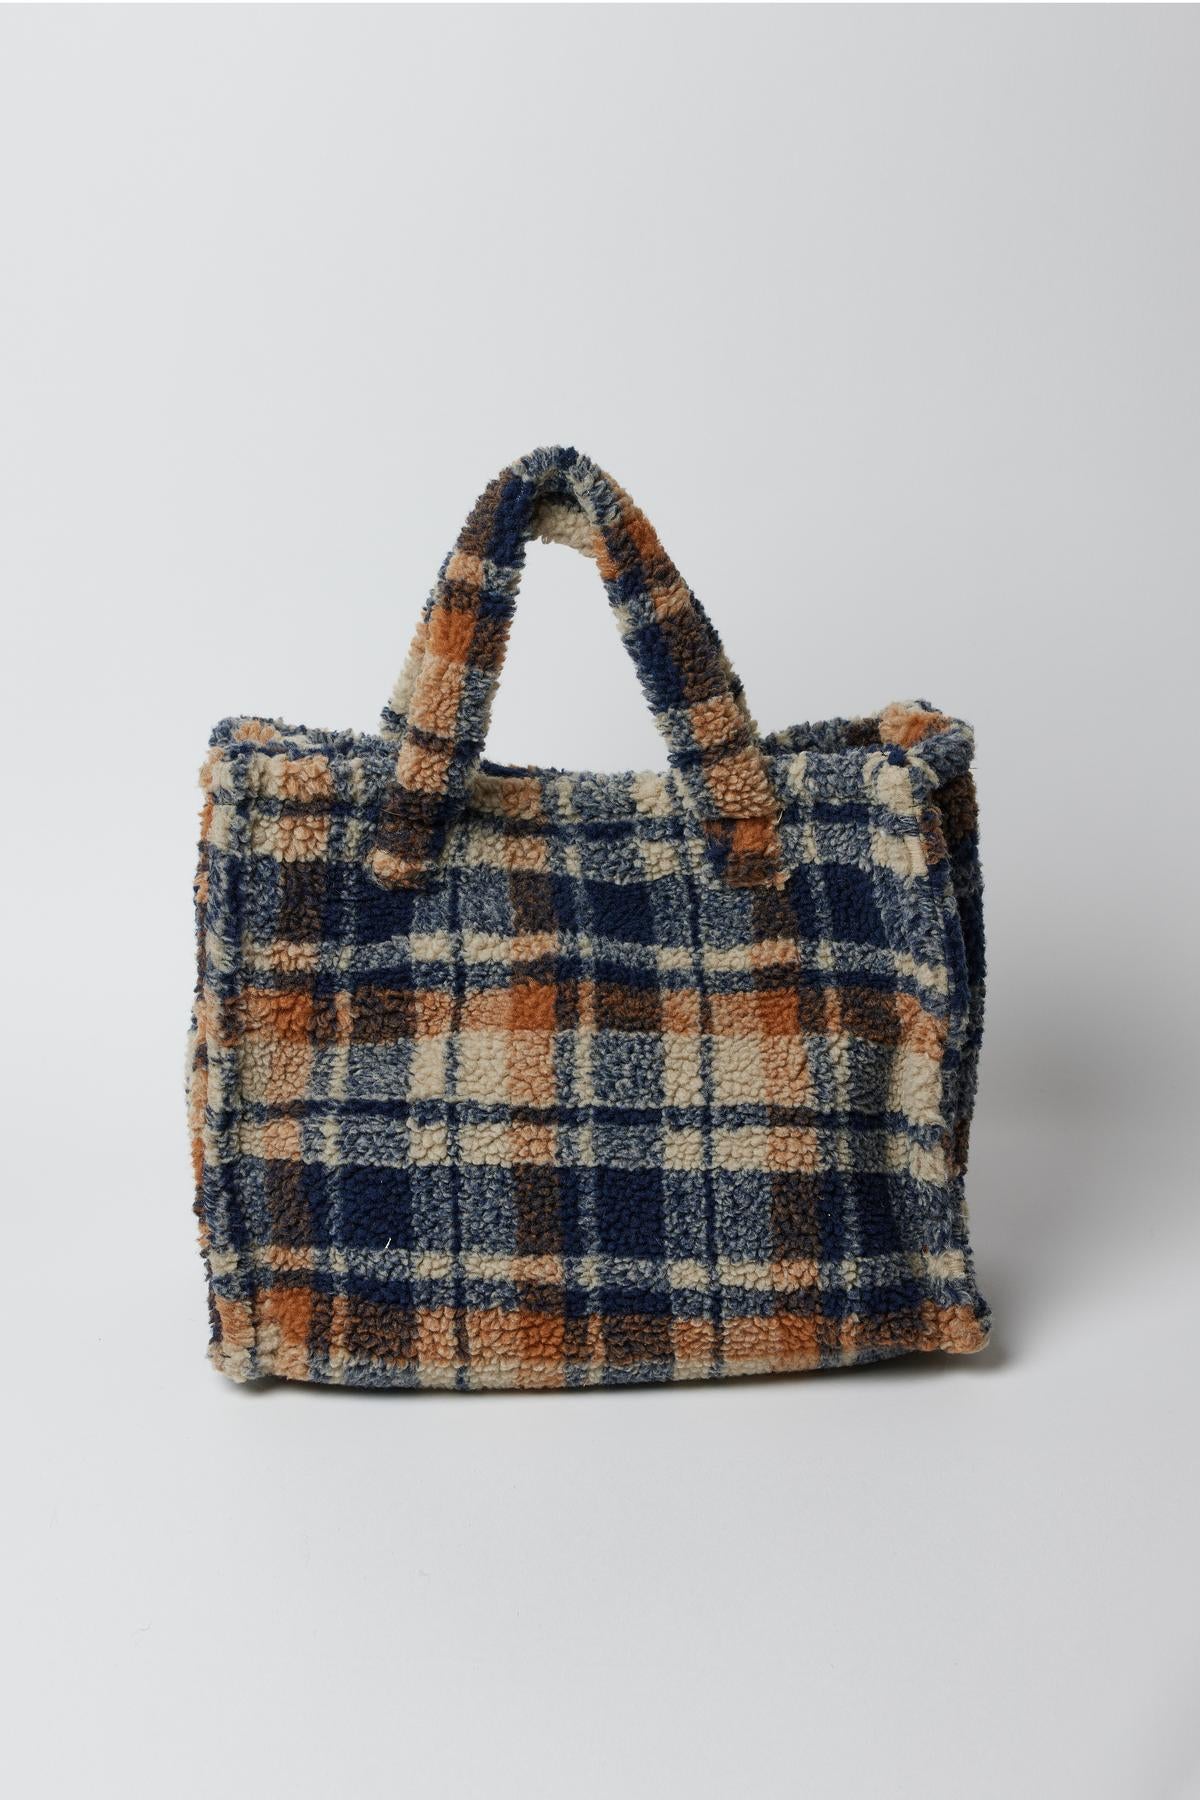 A blue and orange cold-weather SMALL TEDDY TOTE duffle bag by Velvet by Graham & Spencer on a white surface.-35211065983169